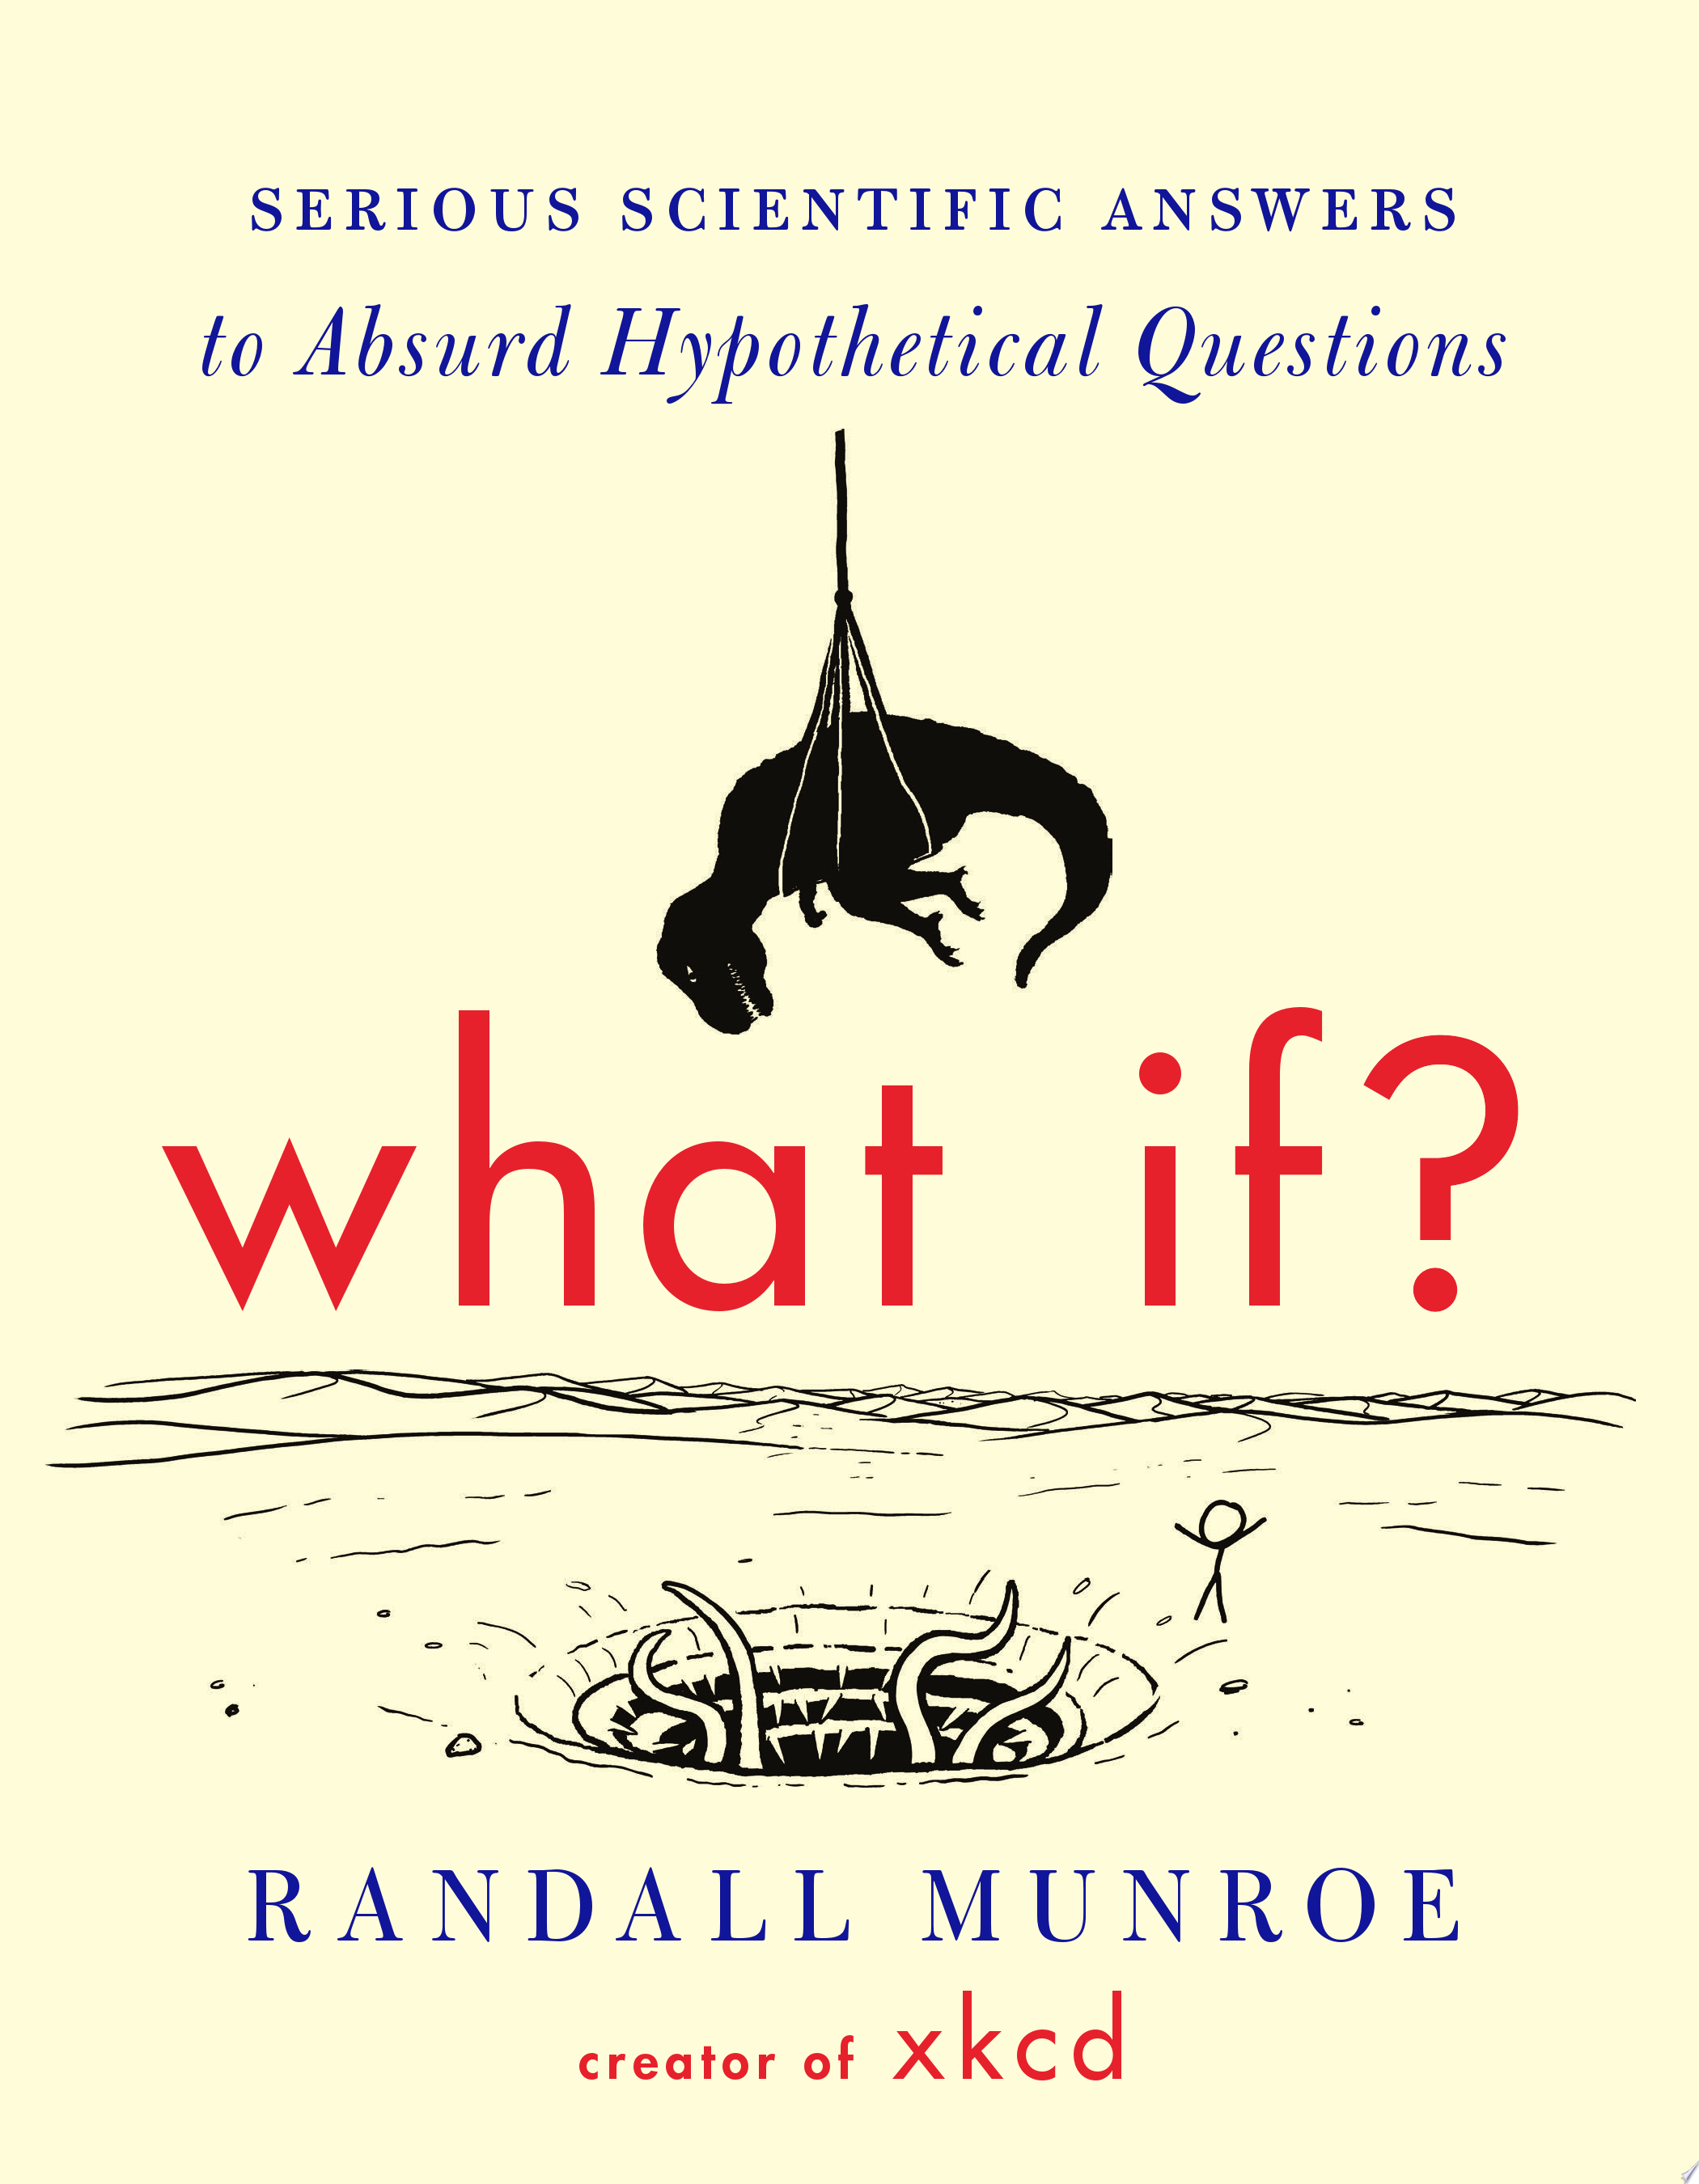 Image for "What If?"